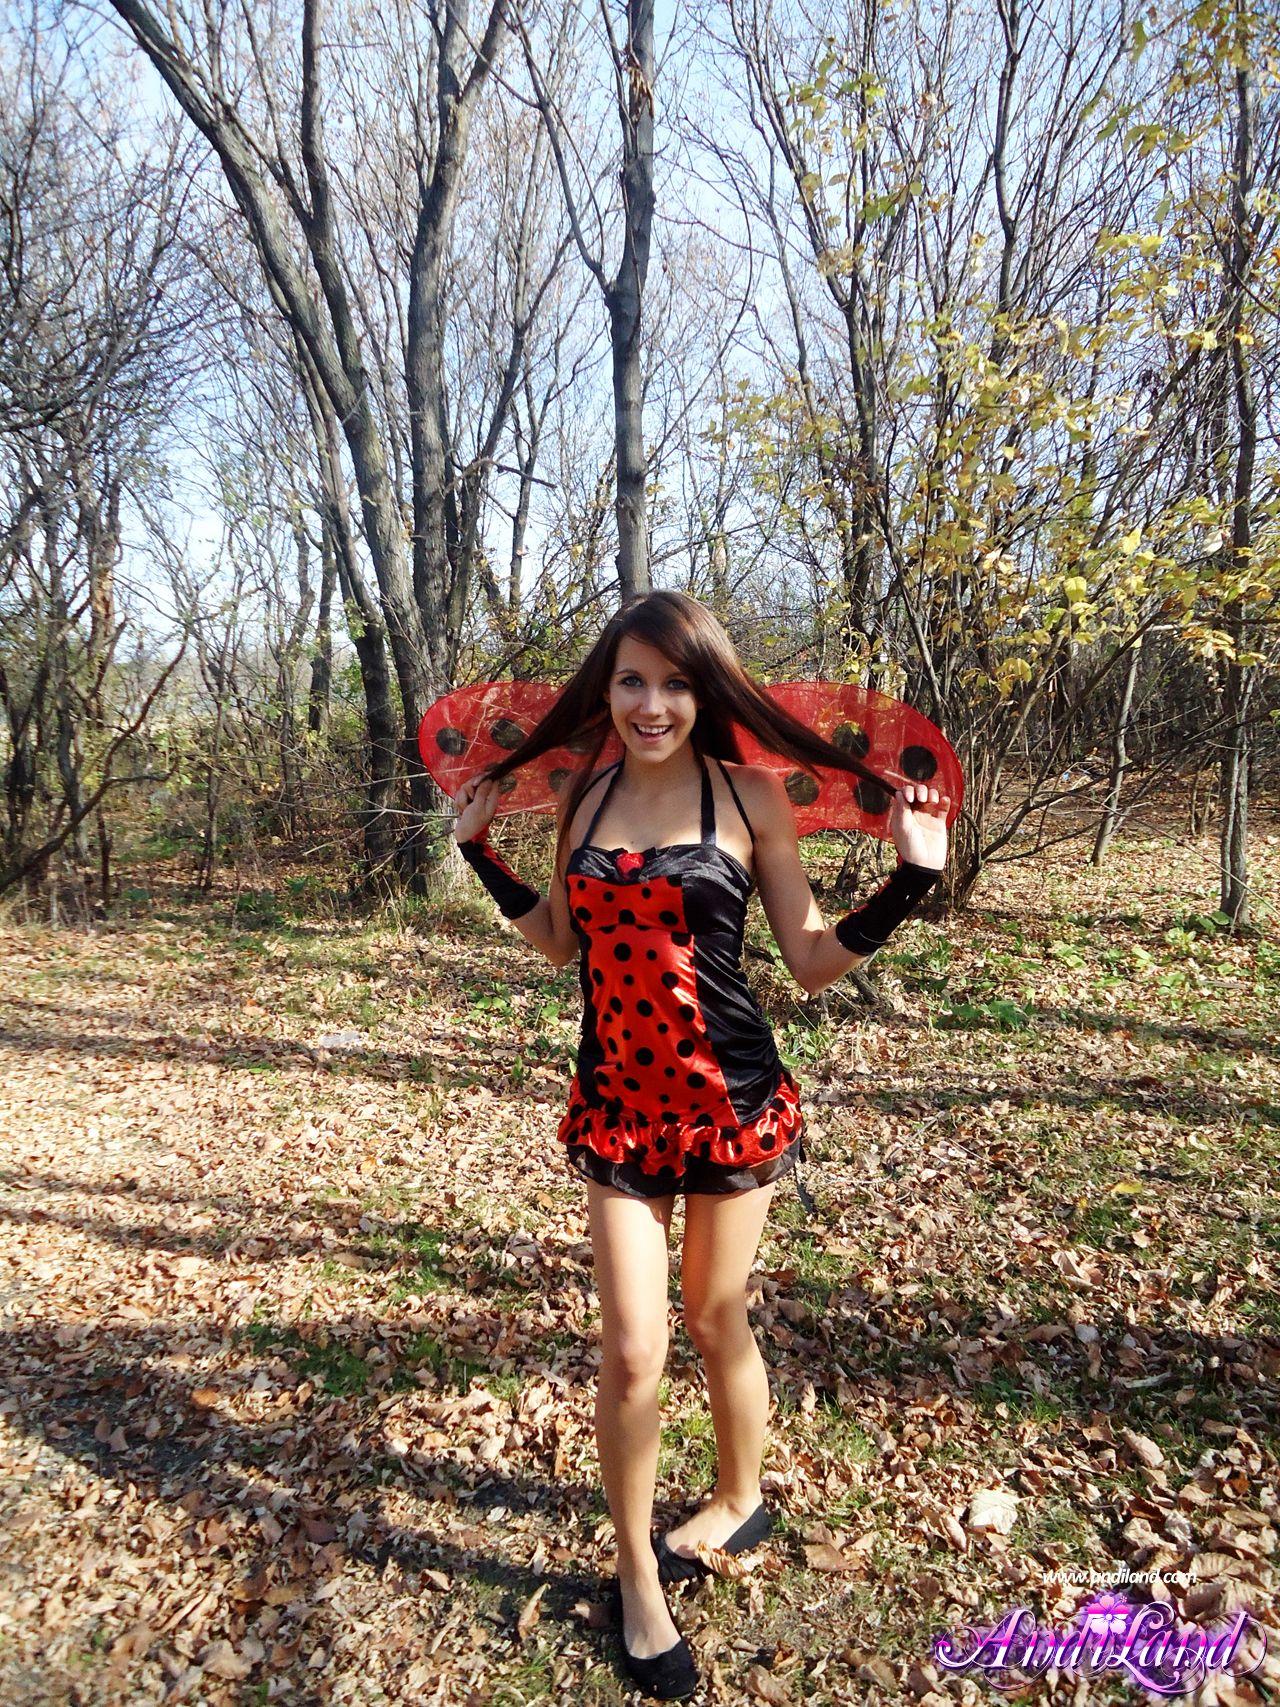 Pictures of Andi looking like the prettiest ladybug ever #53143948